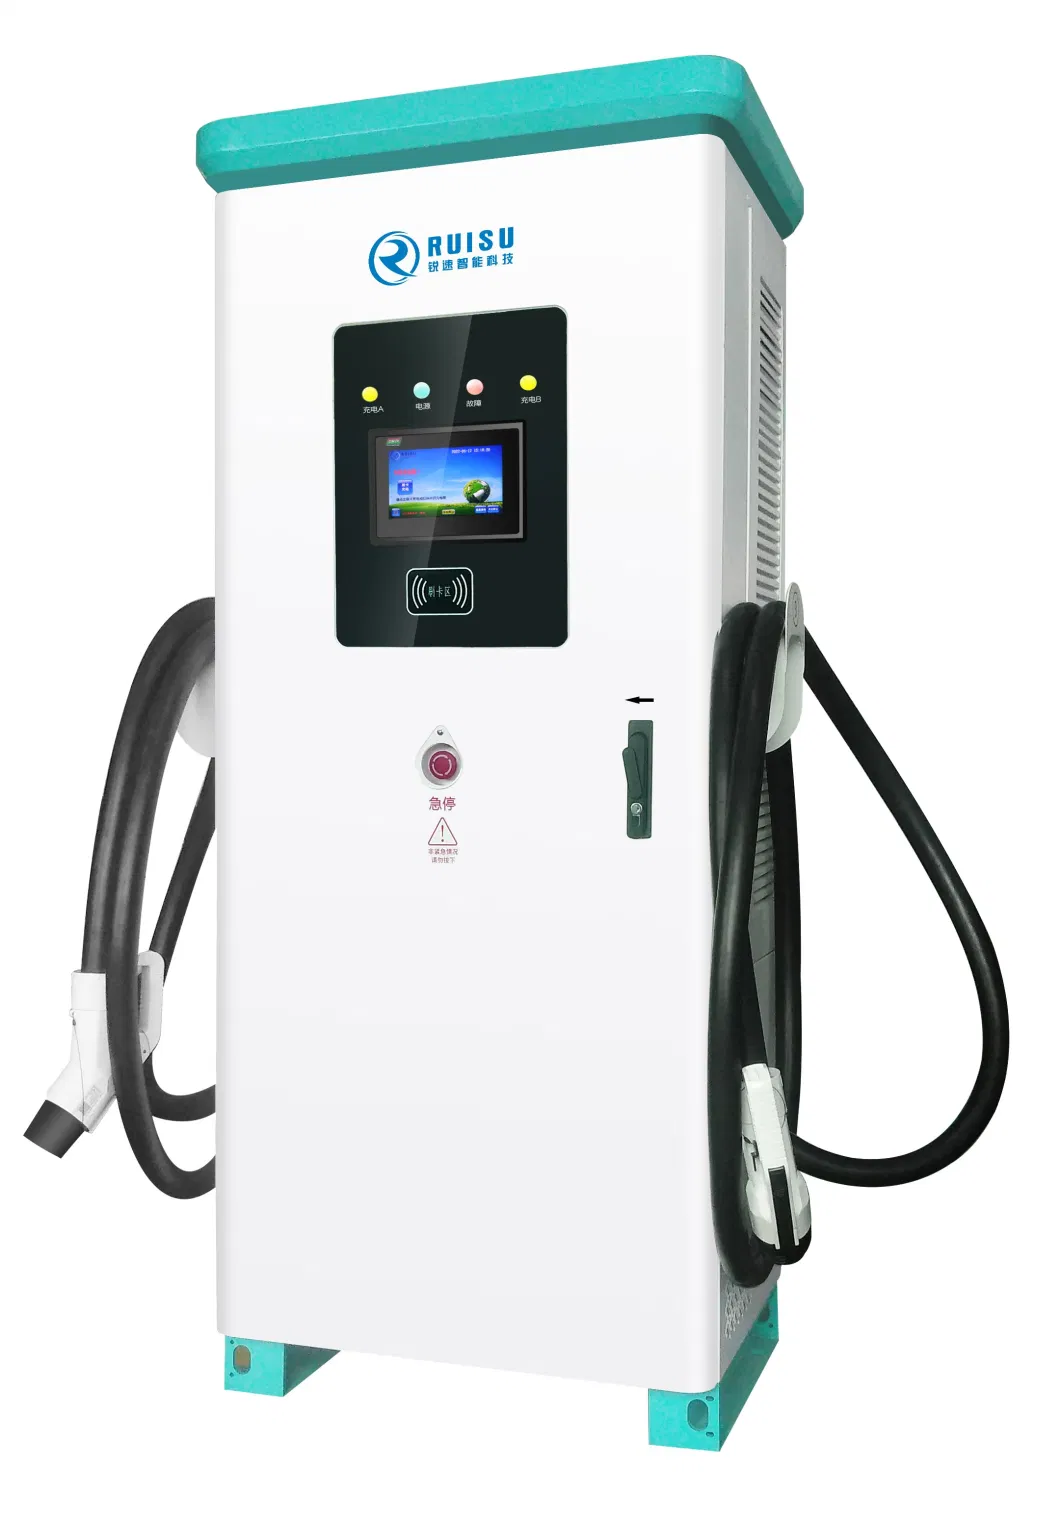 160kw EV Charger CE Certified DC CCS Chademo Chinese Source Supplier Single or Double Connector Commercial Evse with Payment System USB Port